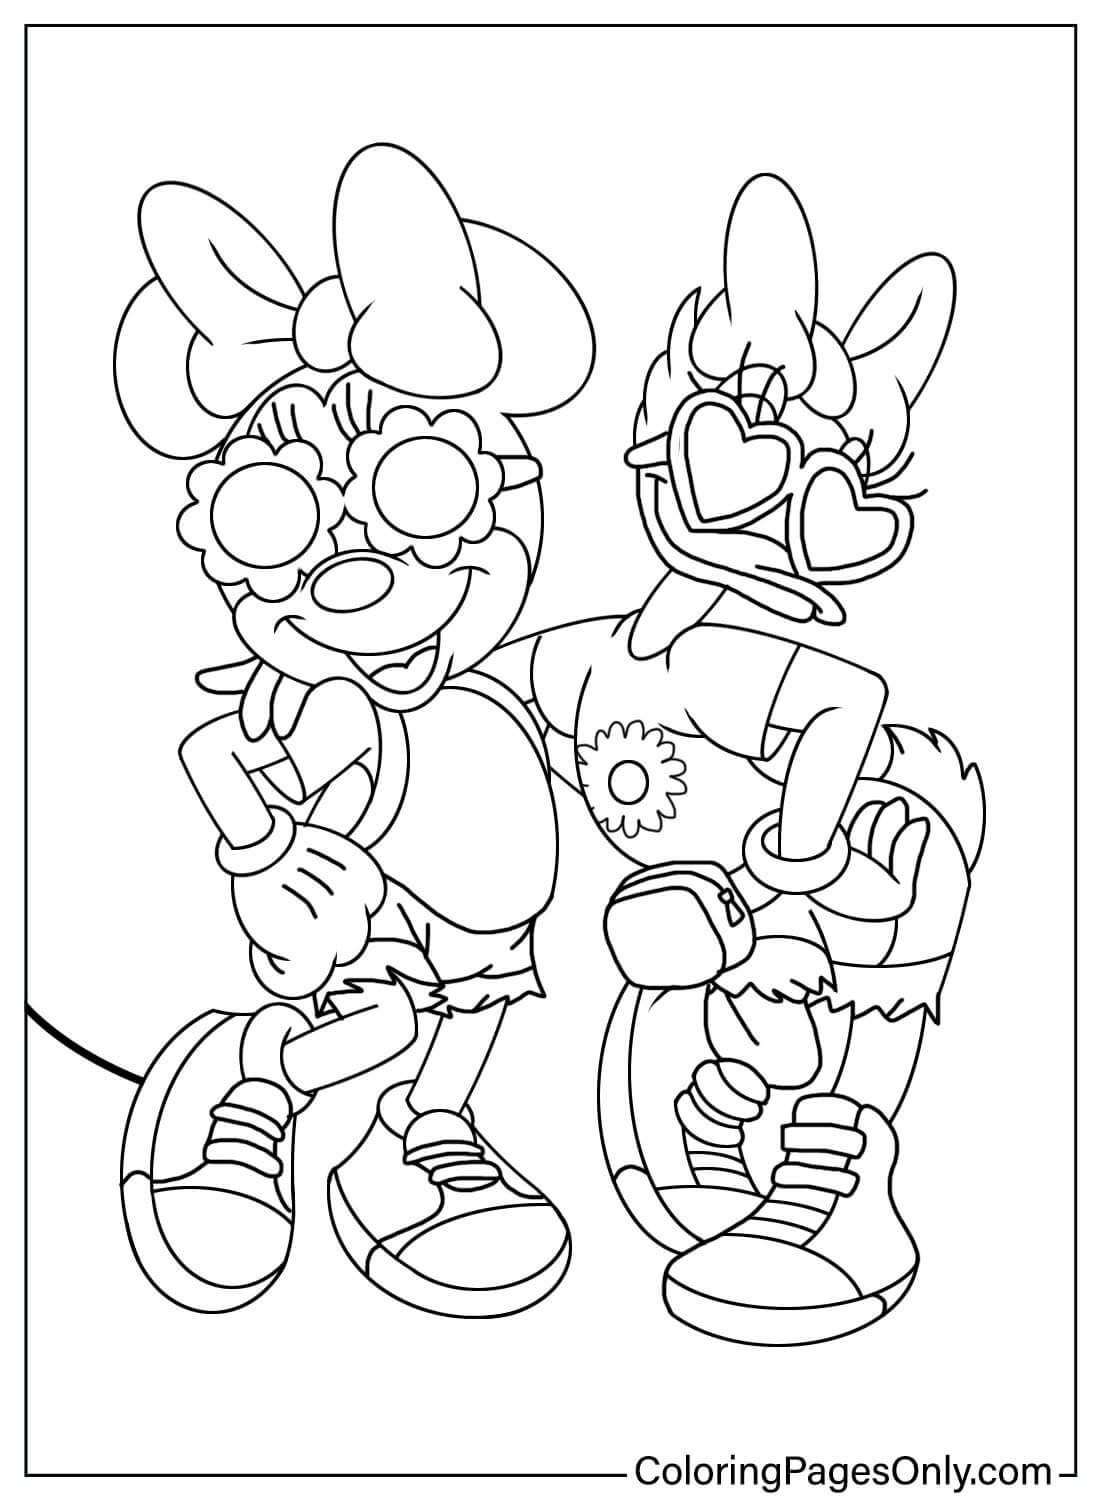 Minnie Mouse and Daisy Duck Coloring Page from Daisy Duck